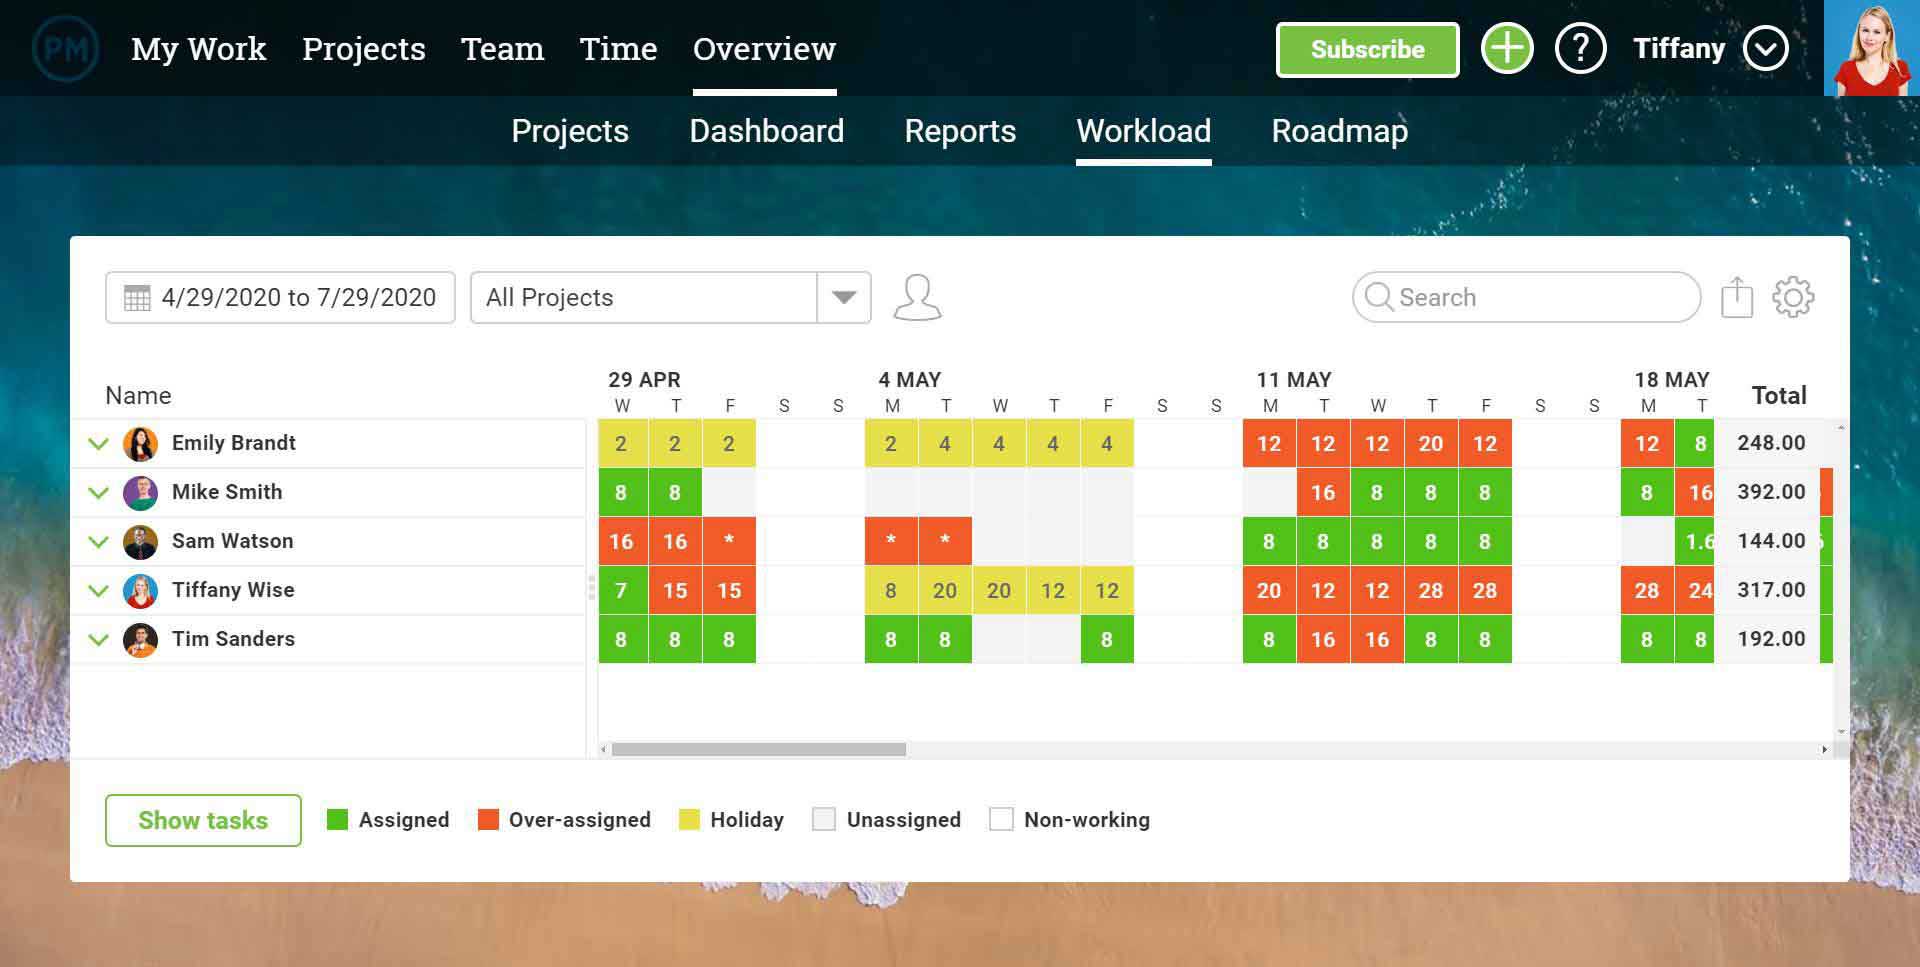 A screenshot of the task workload page in ProjectManager.com